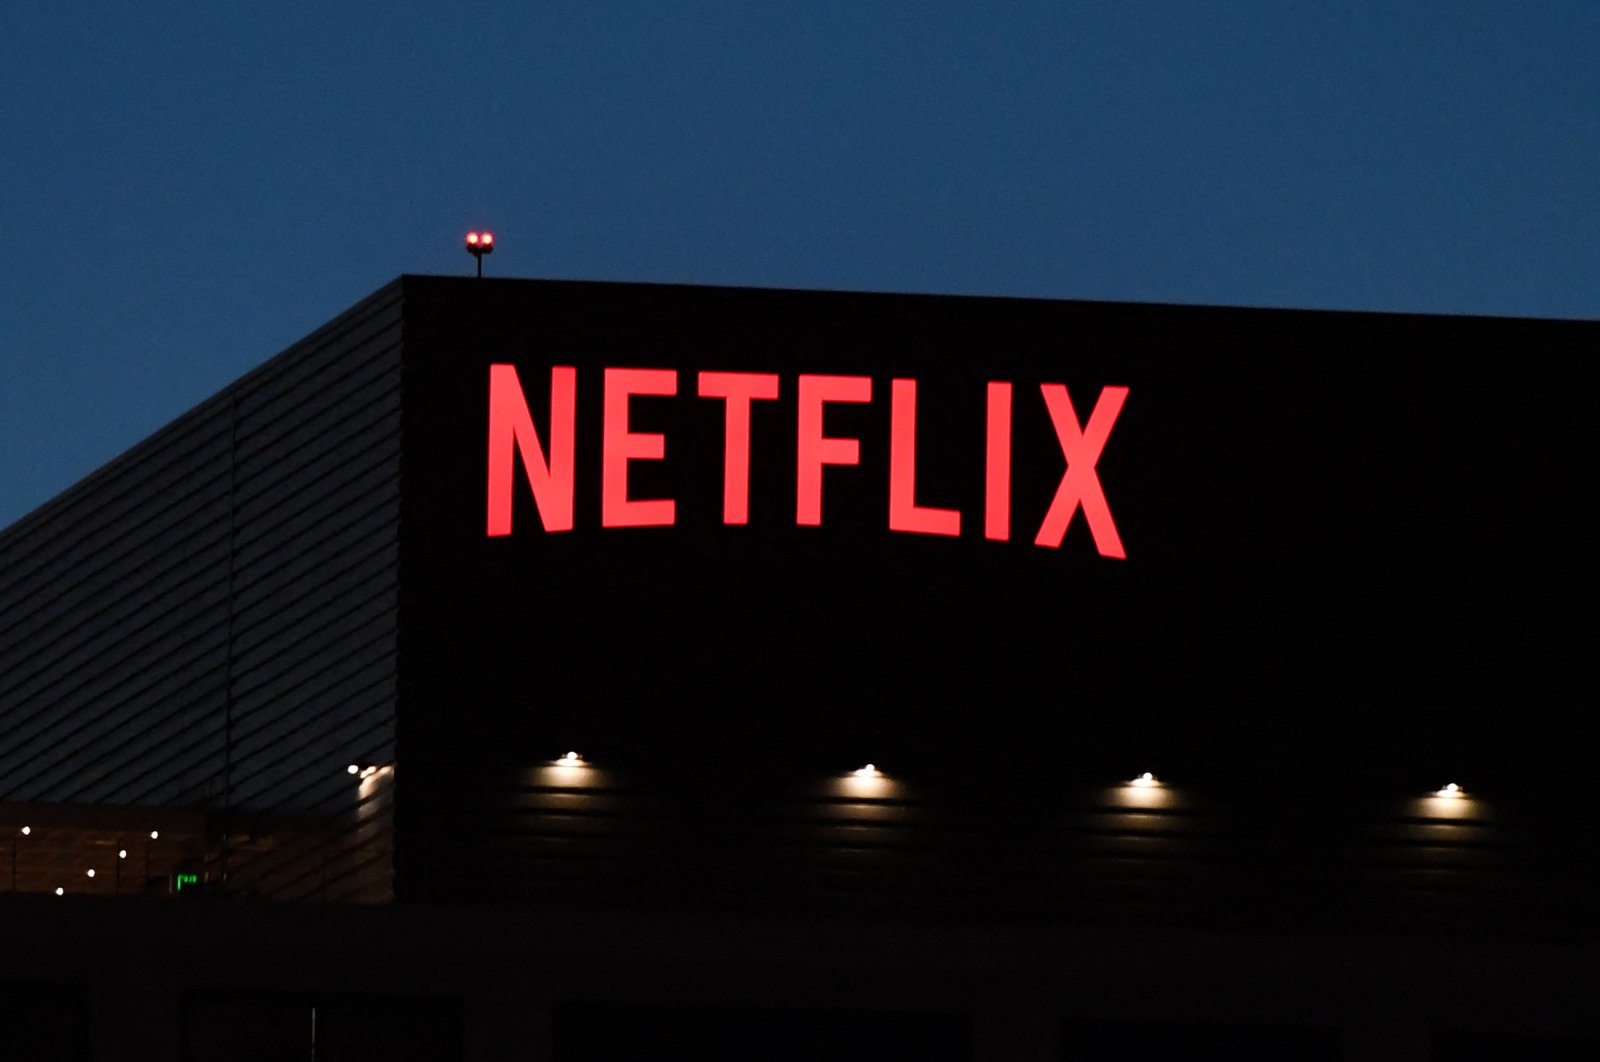 The Netflix logo is seen on the Netflix, Inc. building on Sunset Boulevard in Los Angeles, California, U.S., Oct. 19, 2021. (AFP Photo)